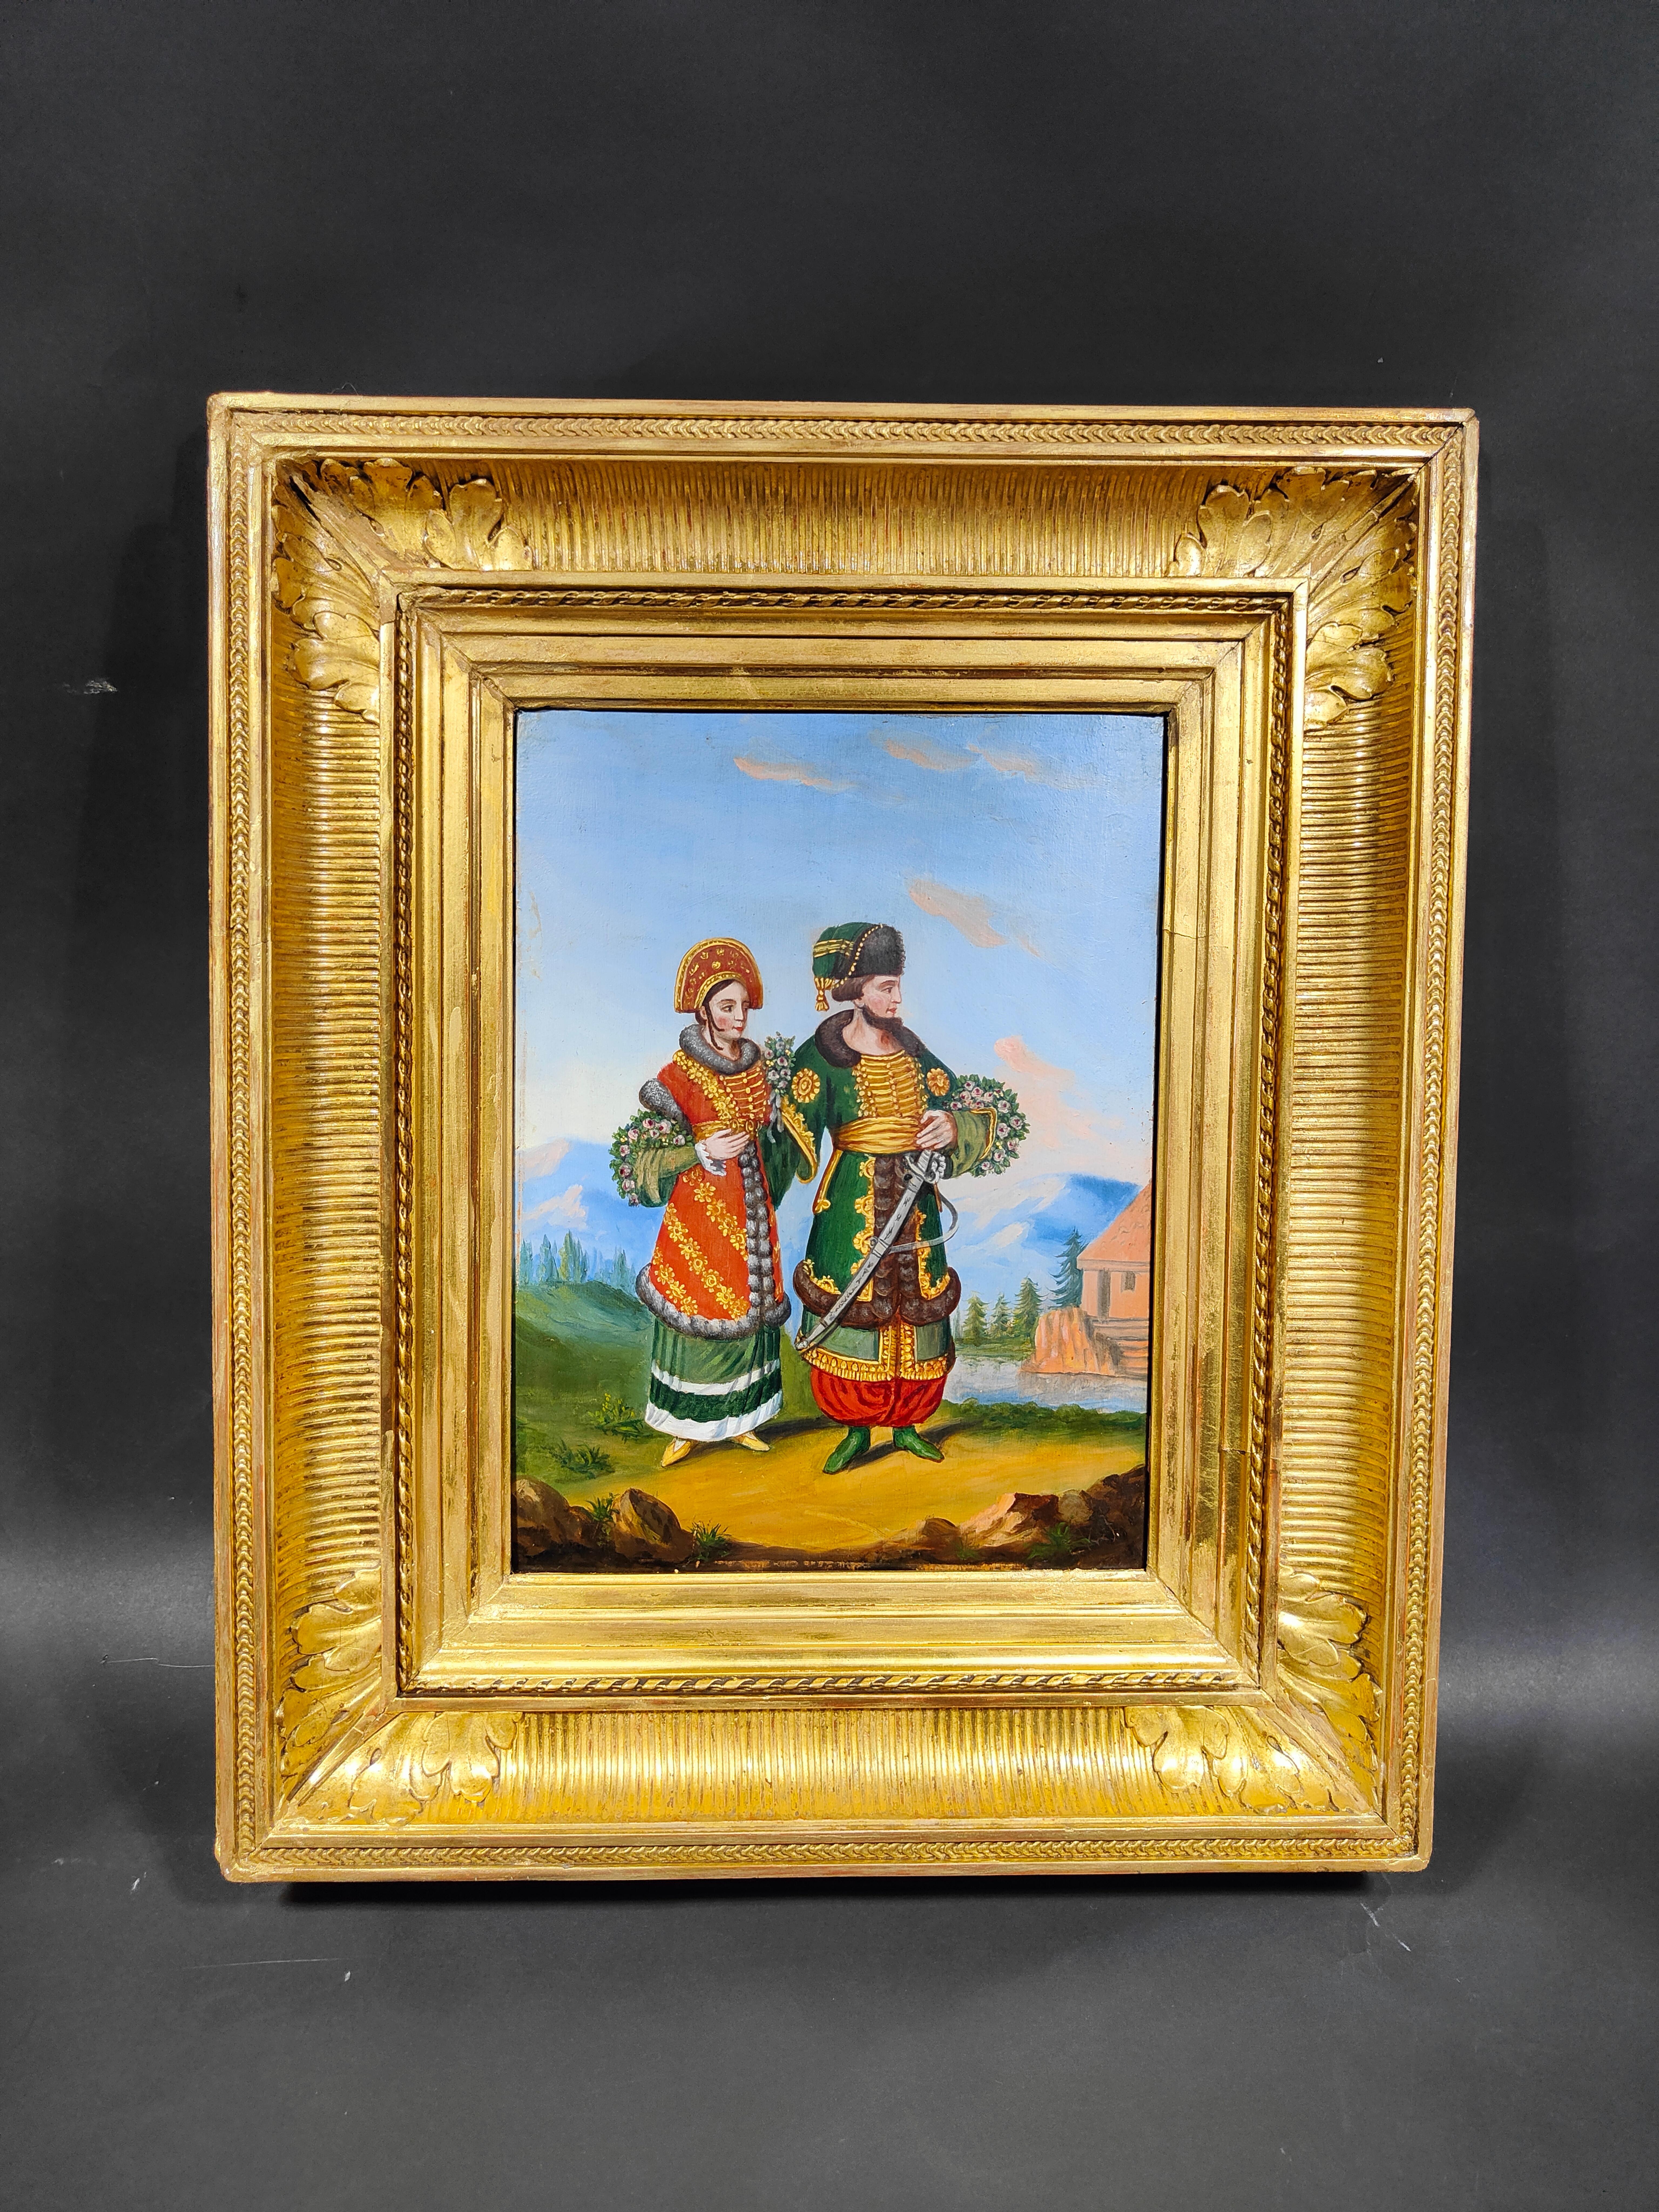 Oil On Panel With National Costumes, 19th century
Interesting oil on panel representing two characters dressed in national costumes of the time. Late 19th century. Eastern European School. With its original frame. Dimensions: 31x24 cm without frame